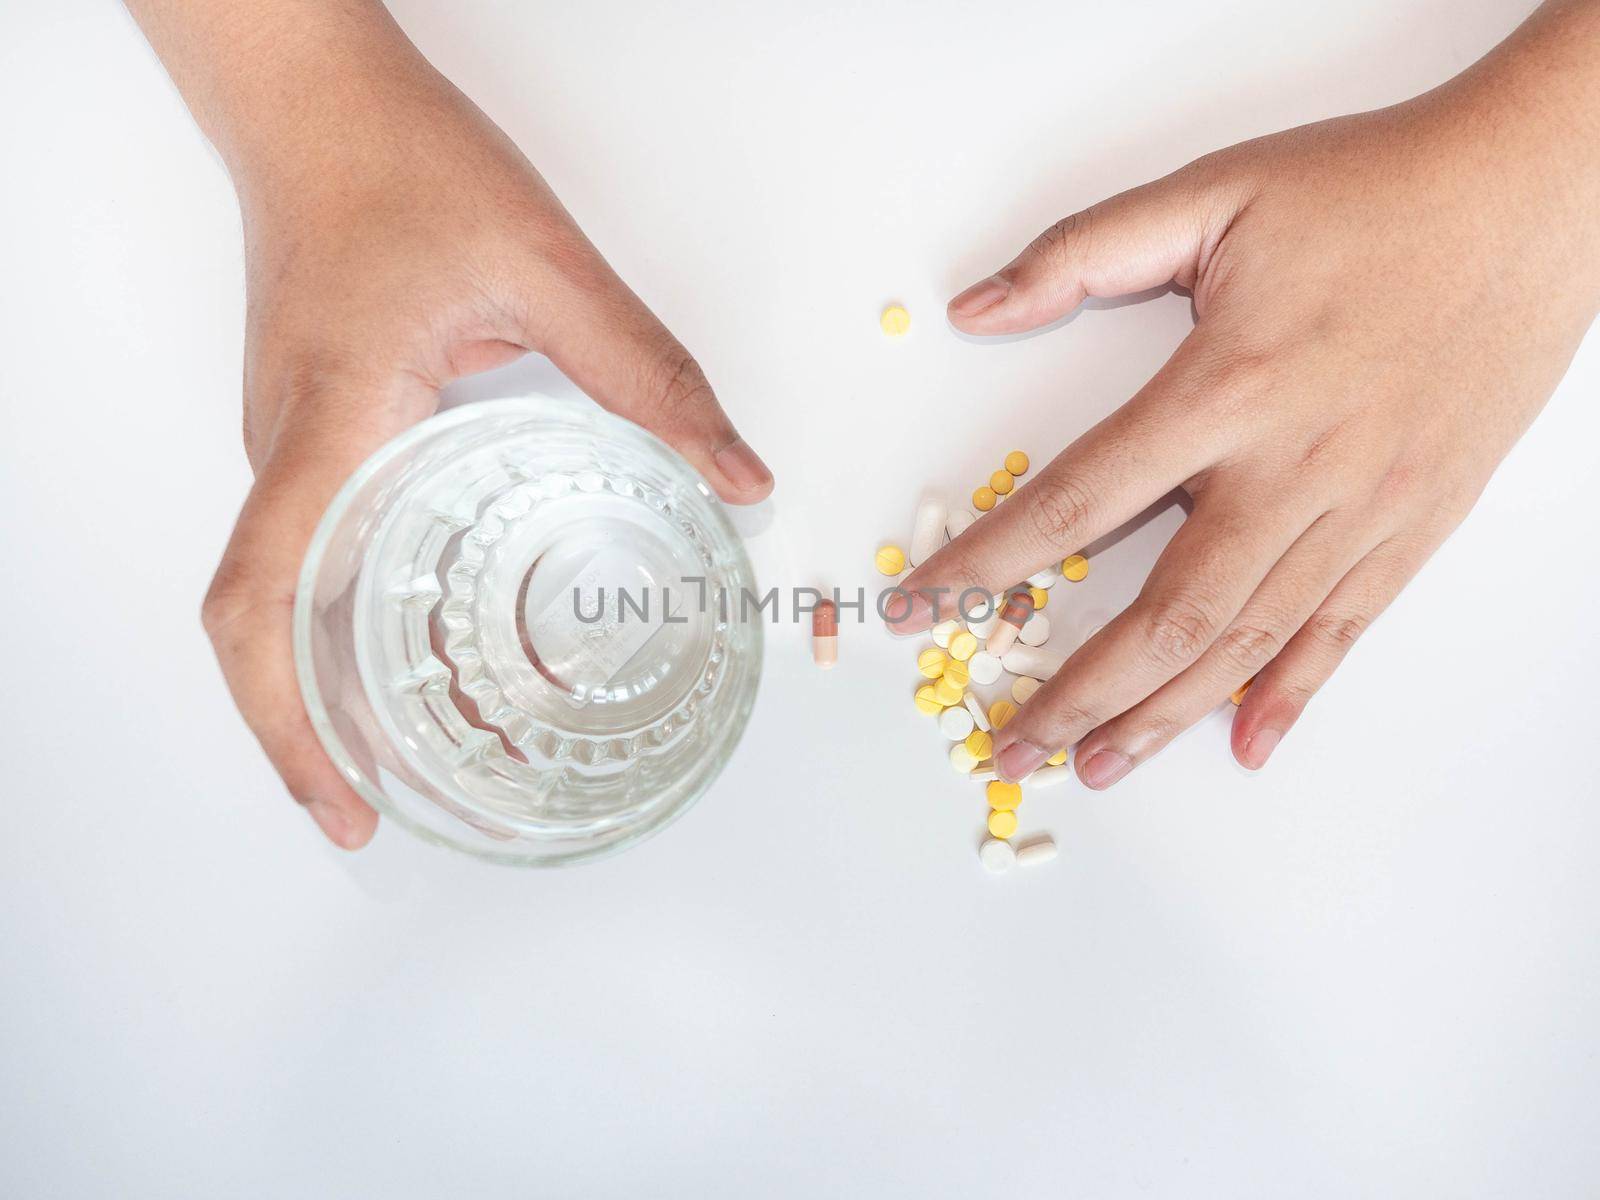 A woman with her hand on the drug The other hand was picking up a glass of water. by Kulpreya